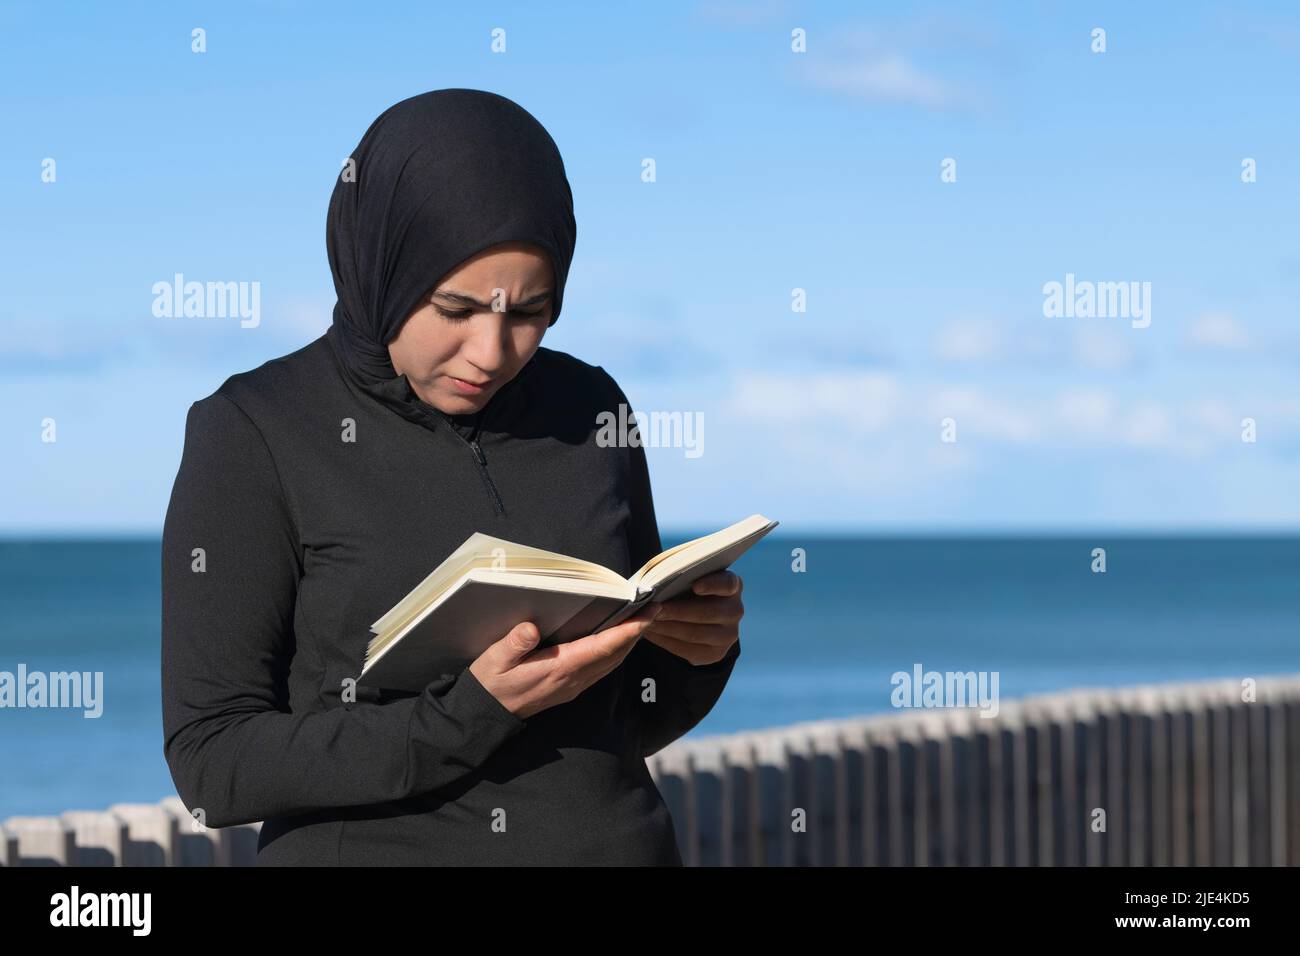 Focused muslim woman reading a book outdoors Stock Photo